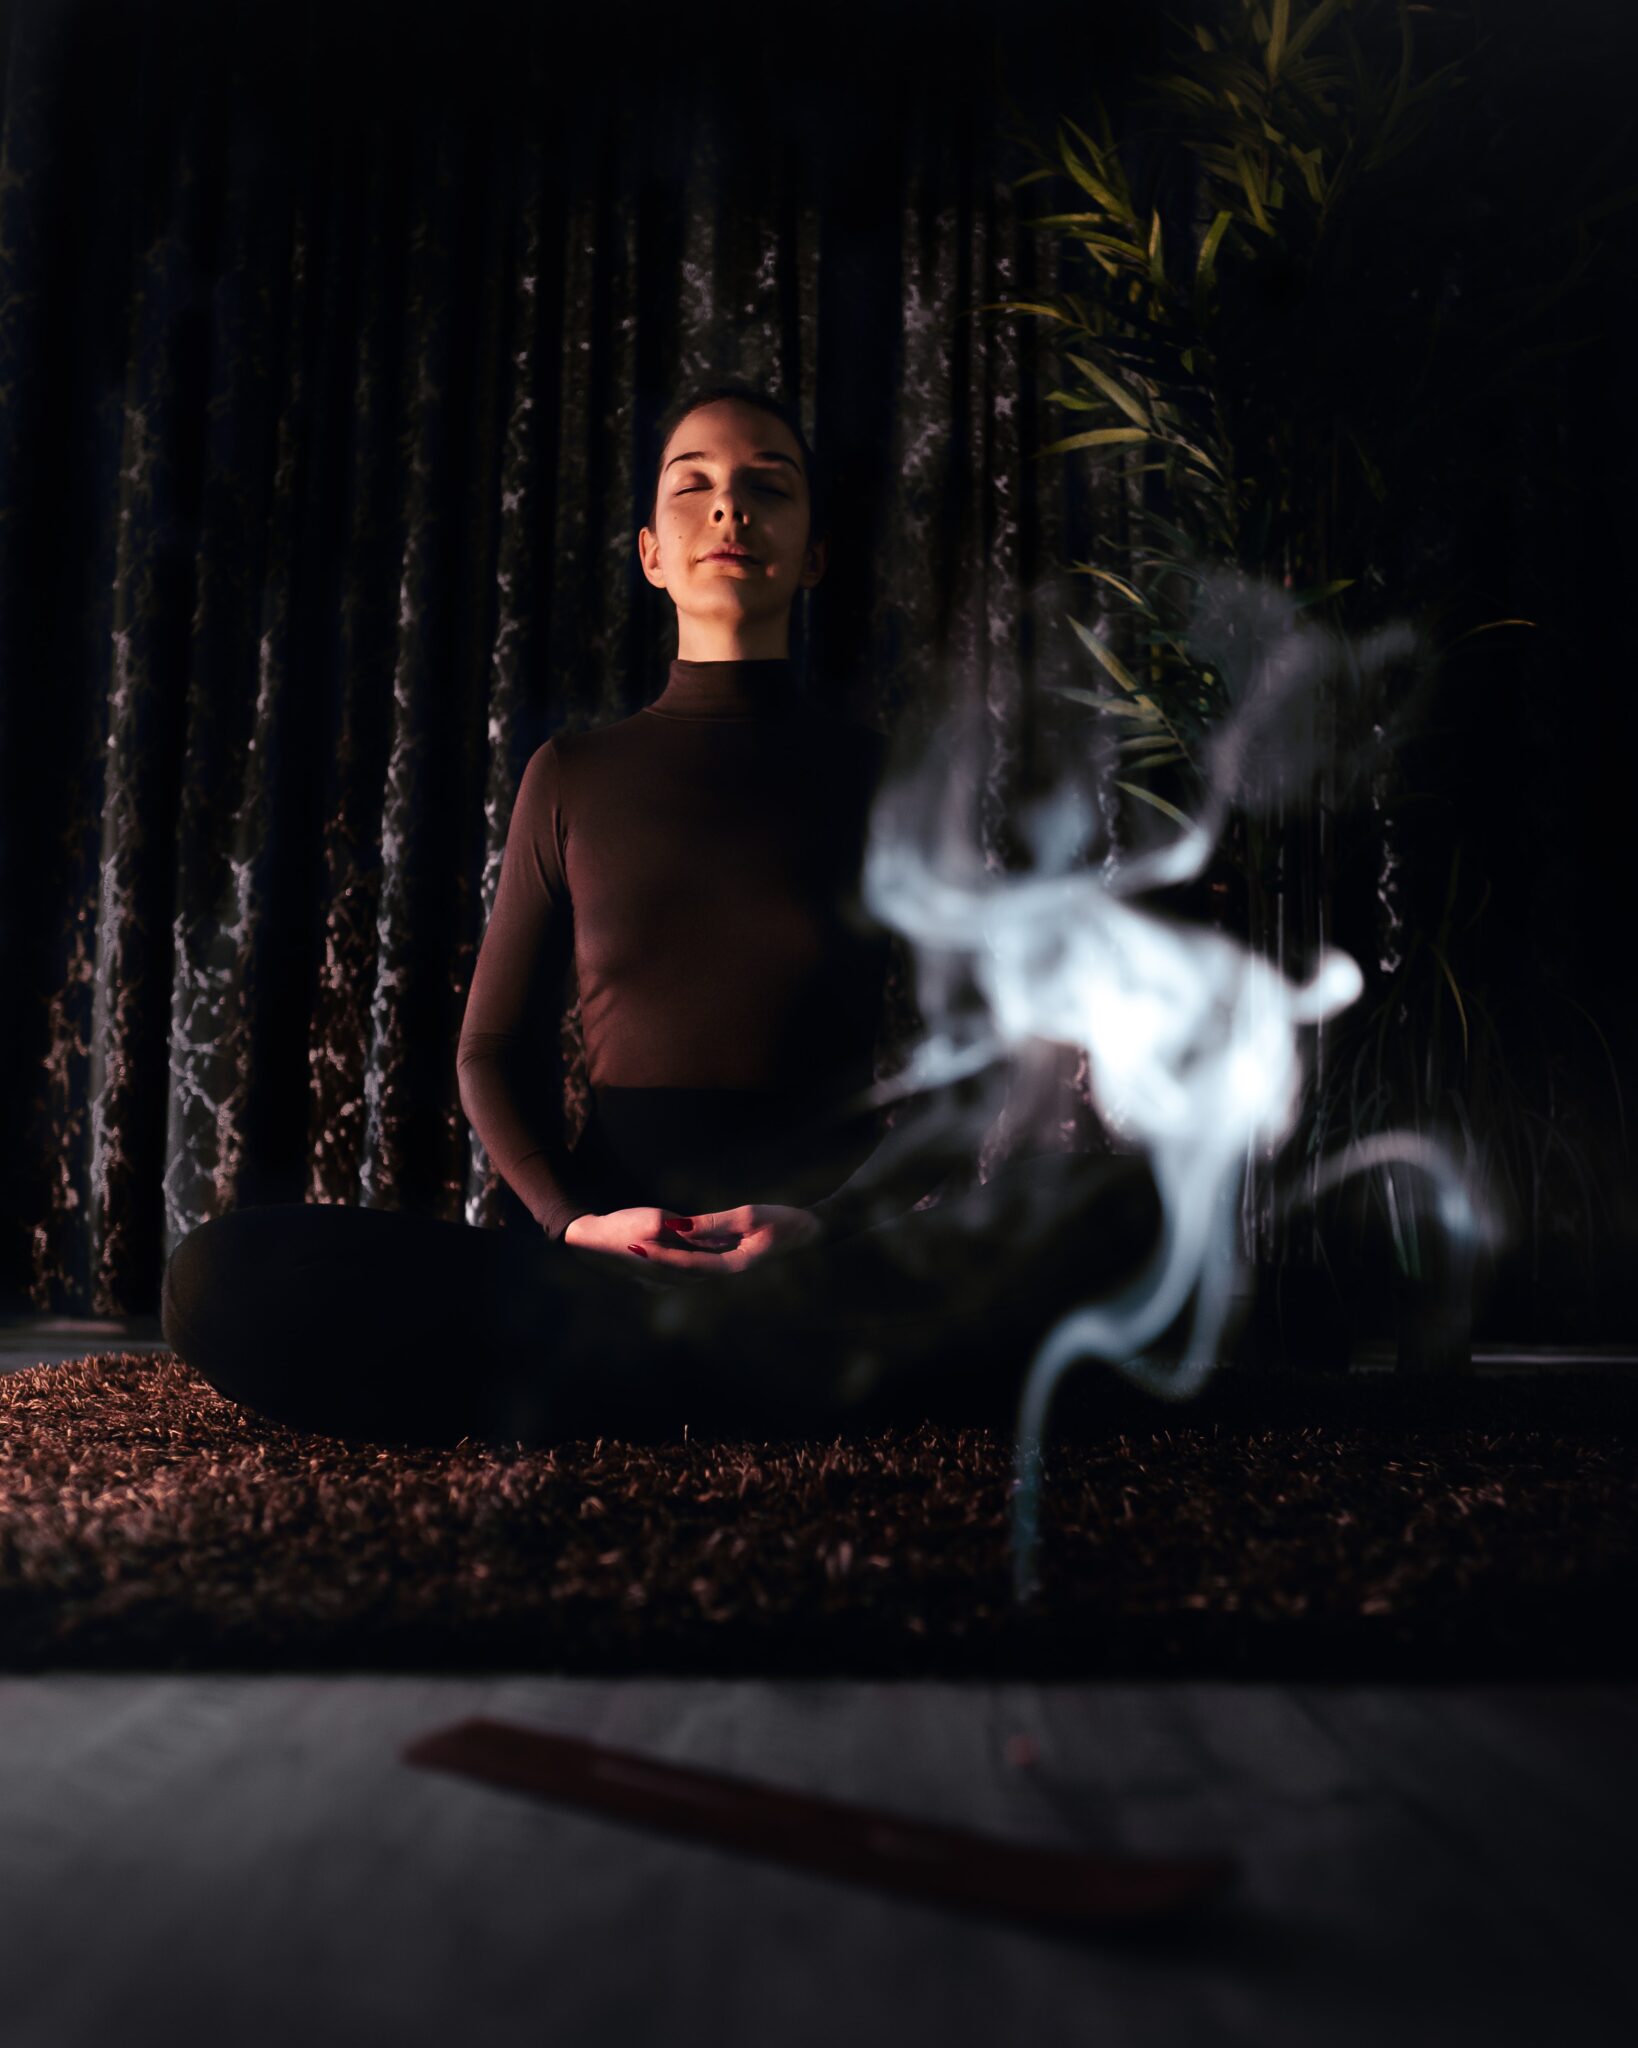 woman with short hair meditating in dark room with incense burning